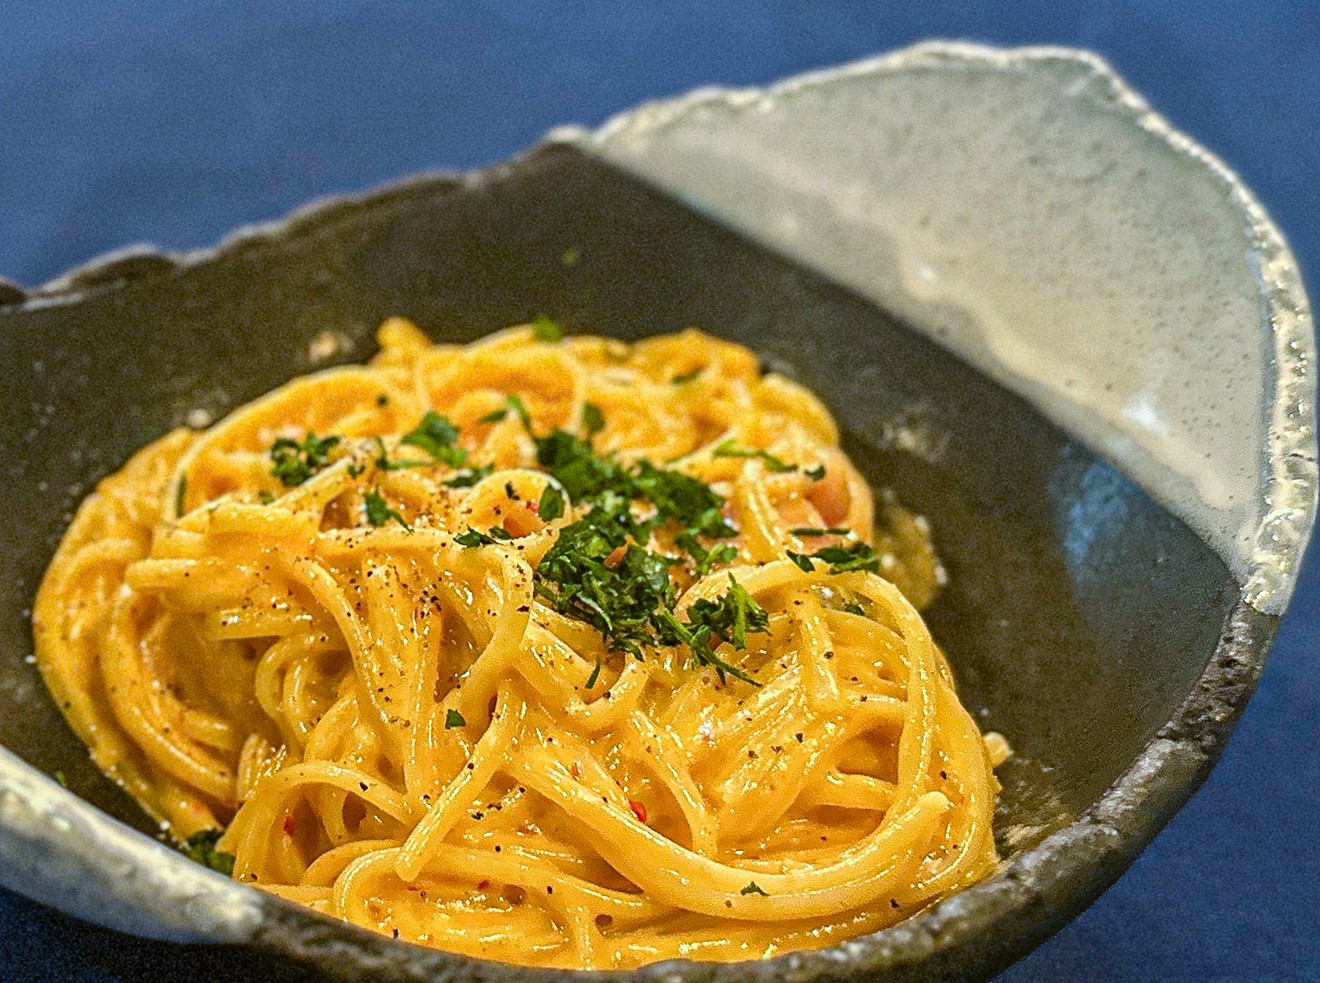 Kimchi carbonara pasta with house-cured guanciale is just one of Chef Akira Imamura's new Japanese/Italian fusion offerings.